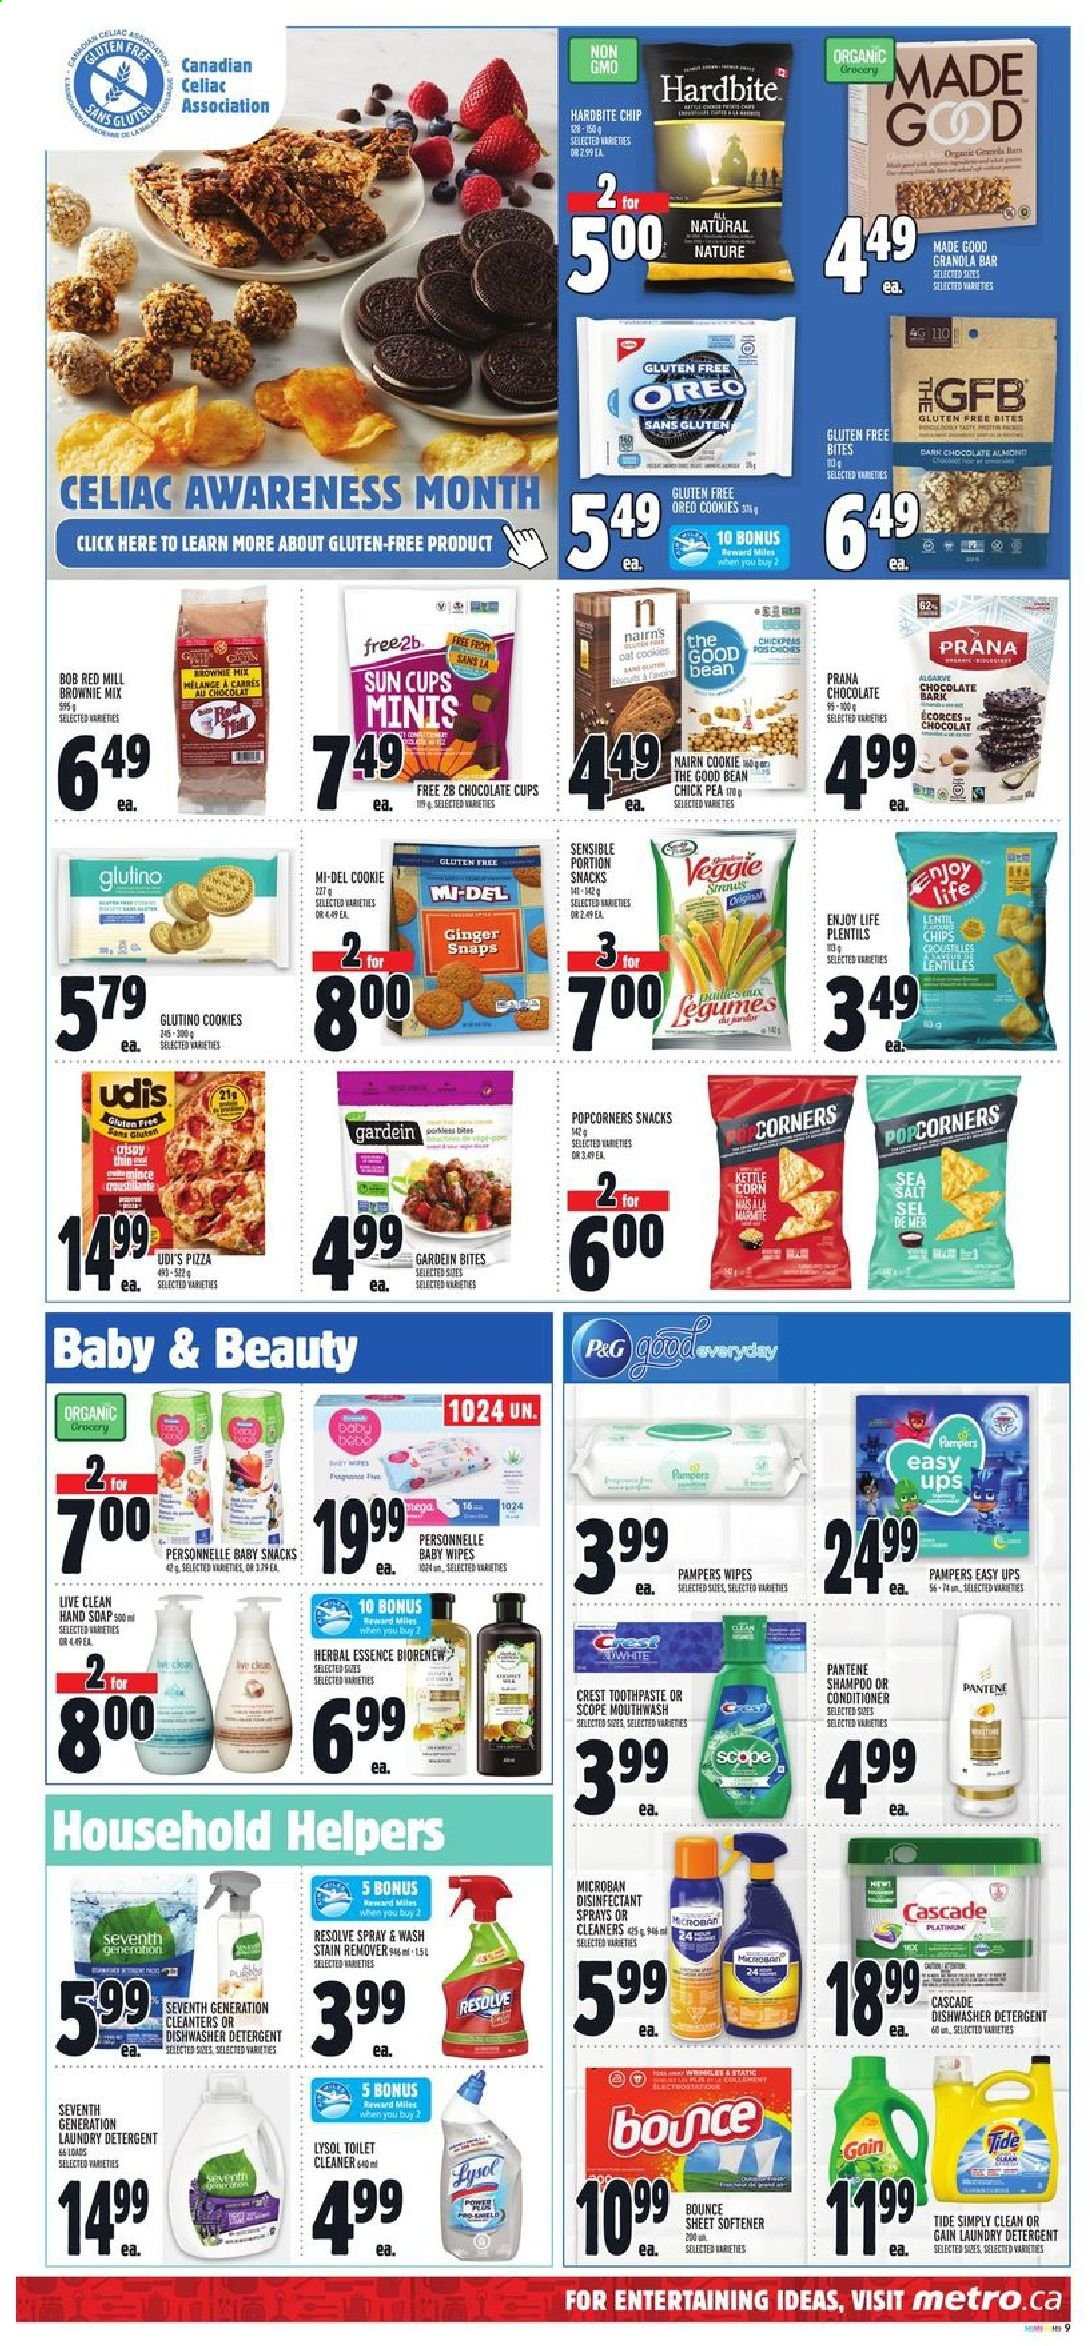 thumbnail - Metro Flyer - May 20, 2021 - May 26, 2021 - Sales products - brownie mix, pizza, cookies, chocolate, snack, kettle corn, popcorn, granola bar, wipes, baby wipes, Gain, cleaner, toilet cleaner, stain remover, Lysol, Tide, fabric softener, Bounce, Cascade, hand soap, soap, toothpaste, mouthwash, Crest, conditioner, cup, Nature Made, Oreo, granola, shampoo, Pampers, Pantene, chips, desinfection. Page 9.